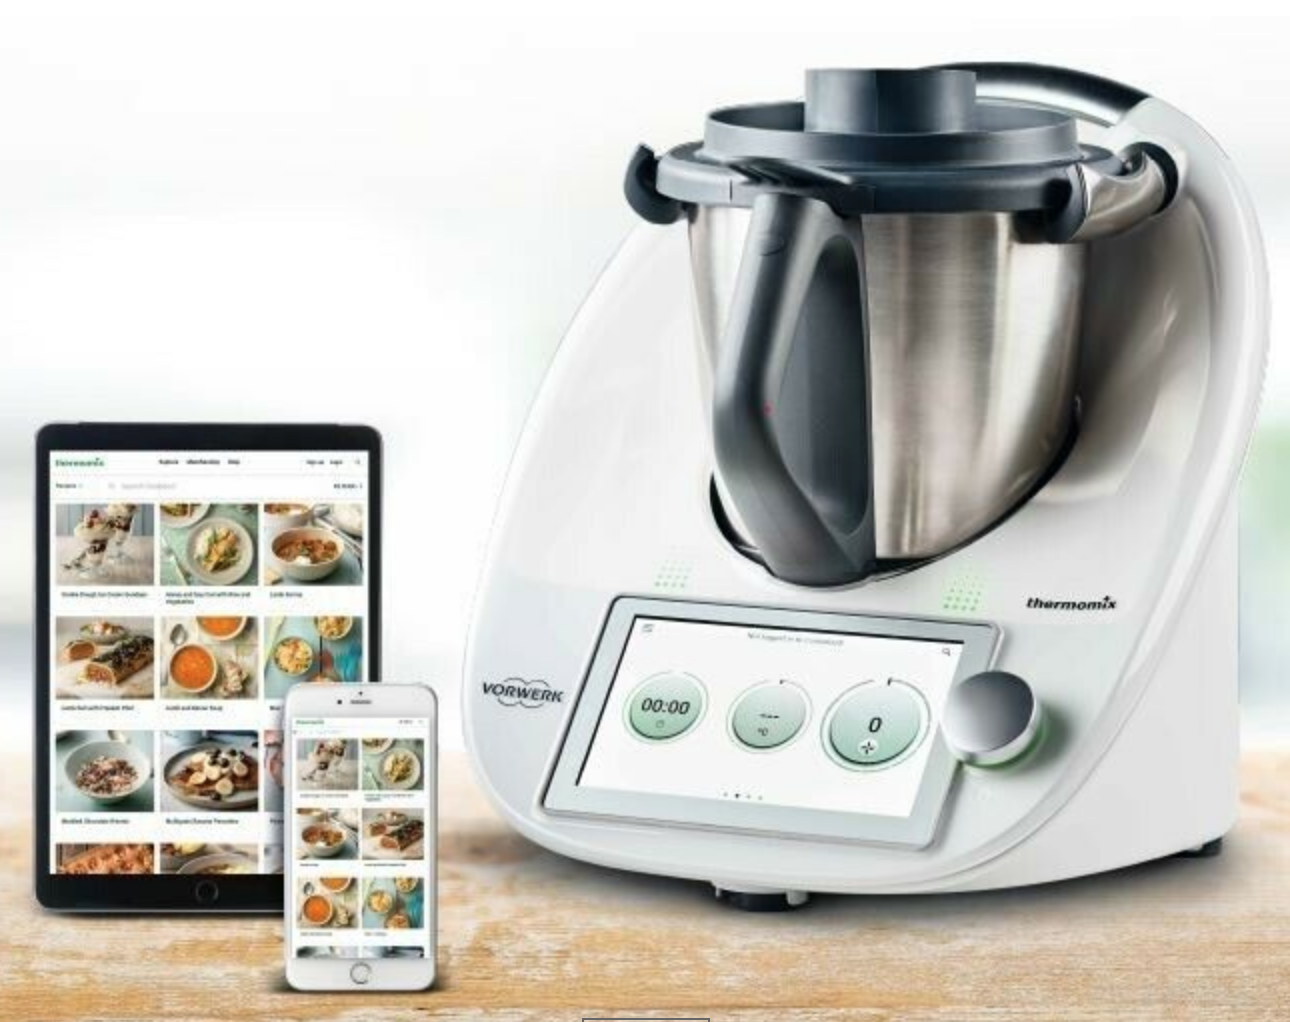 Thermomix USA - “The Thermomix TM6 all-in-one cooking